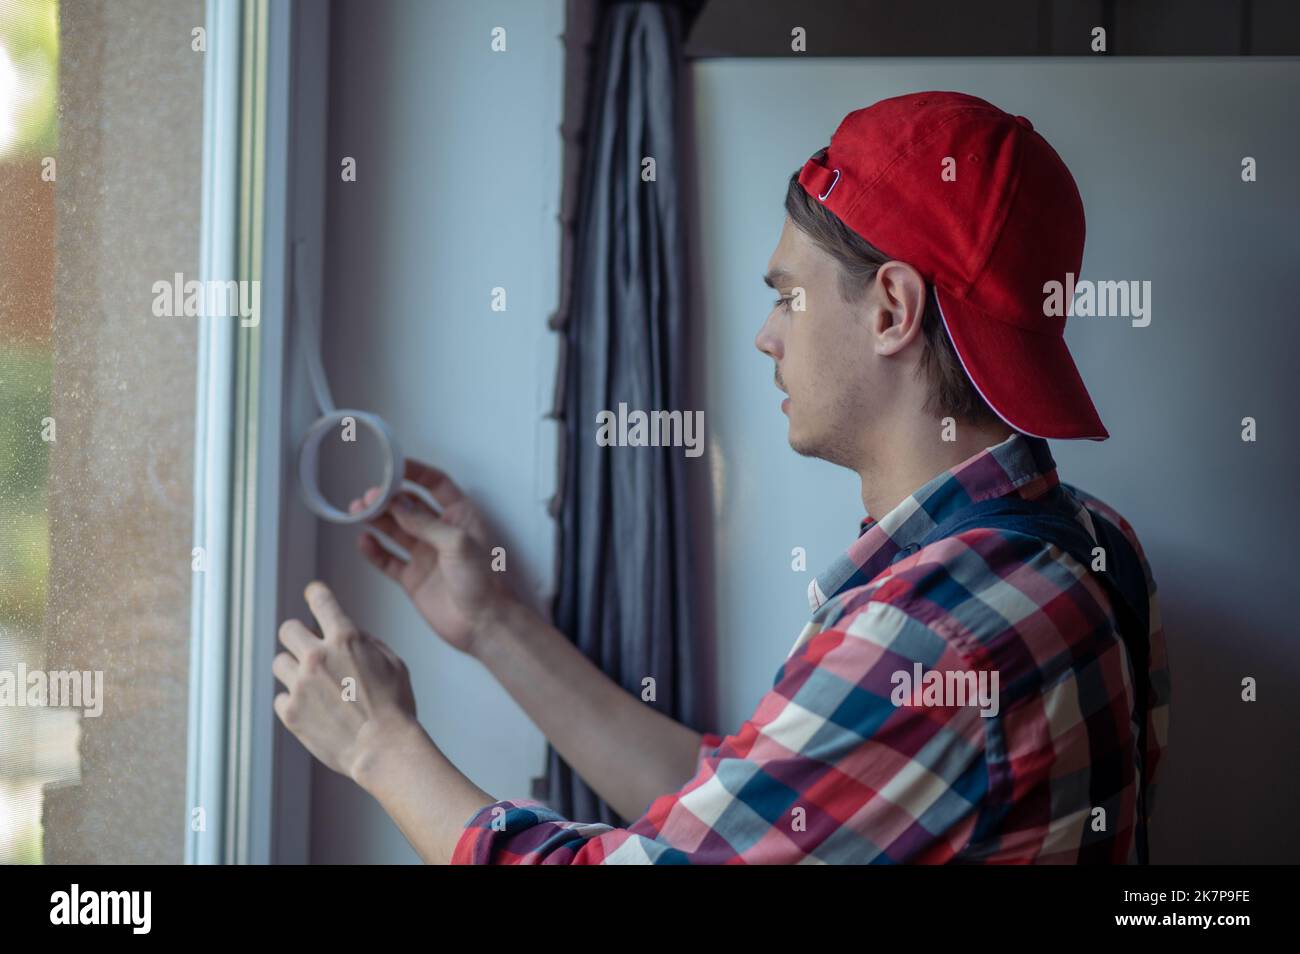 Serious focused repairman engaged in sealing the window Stock Photo